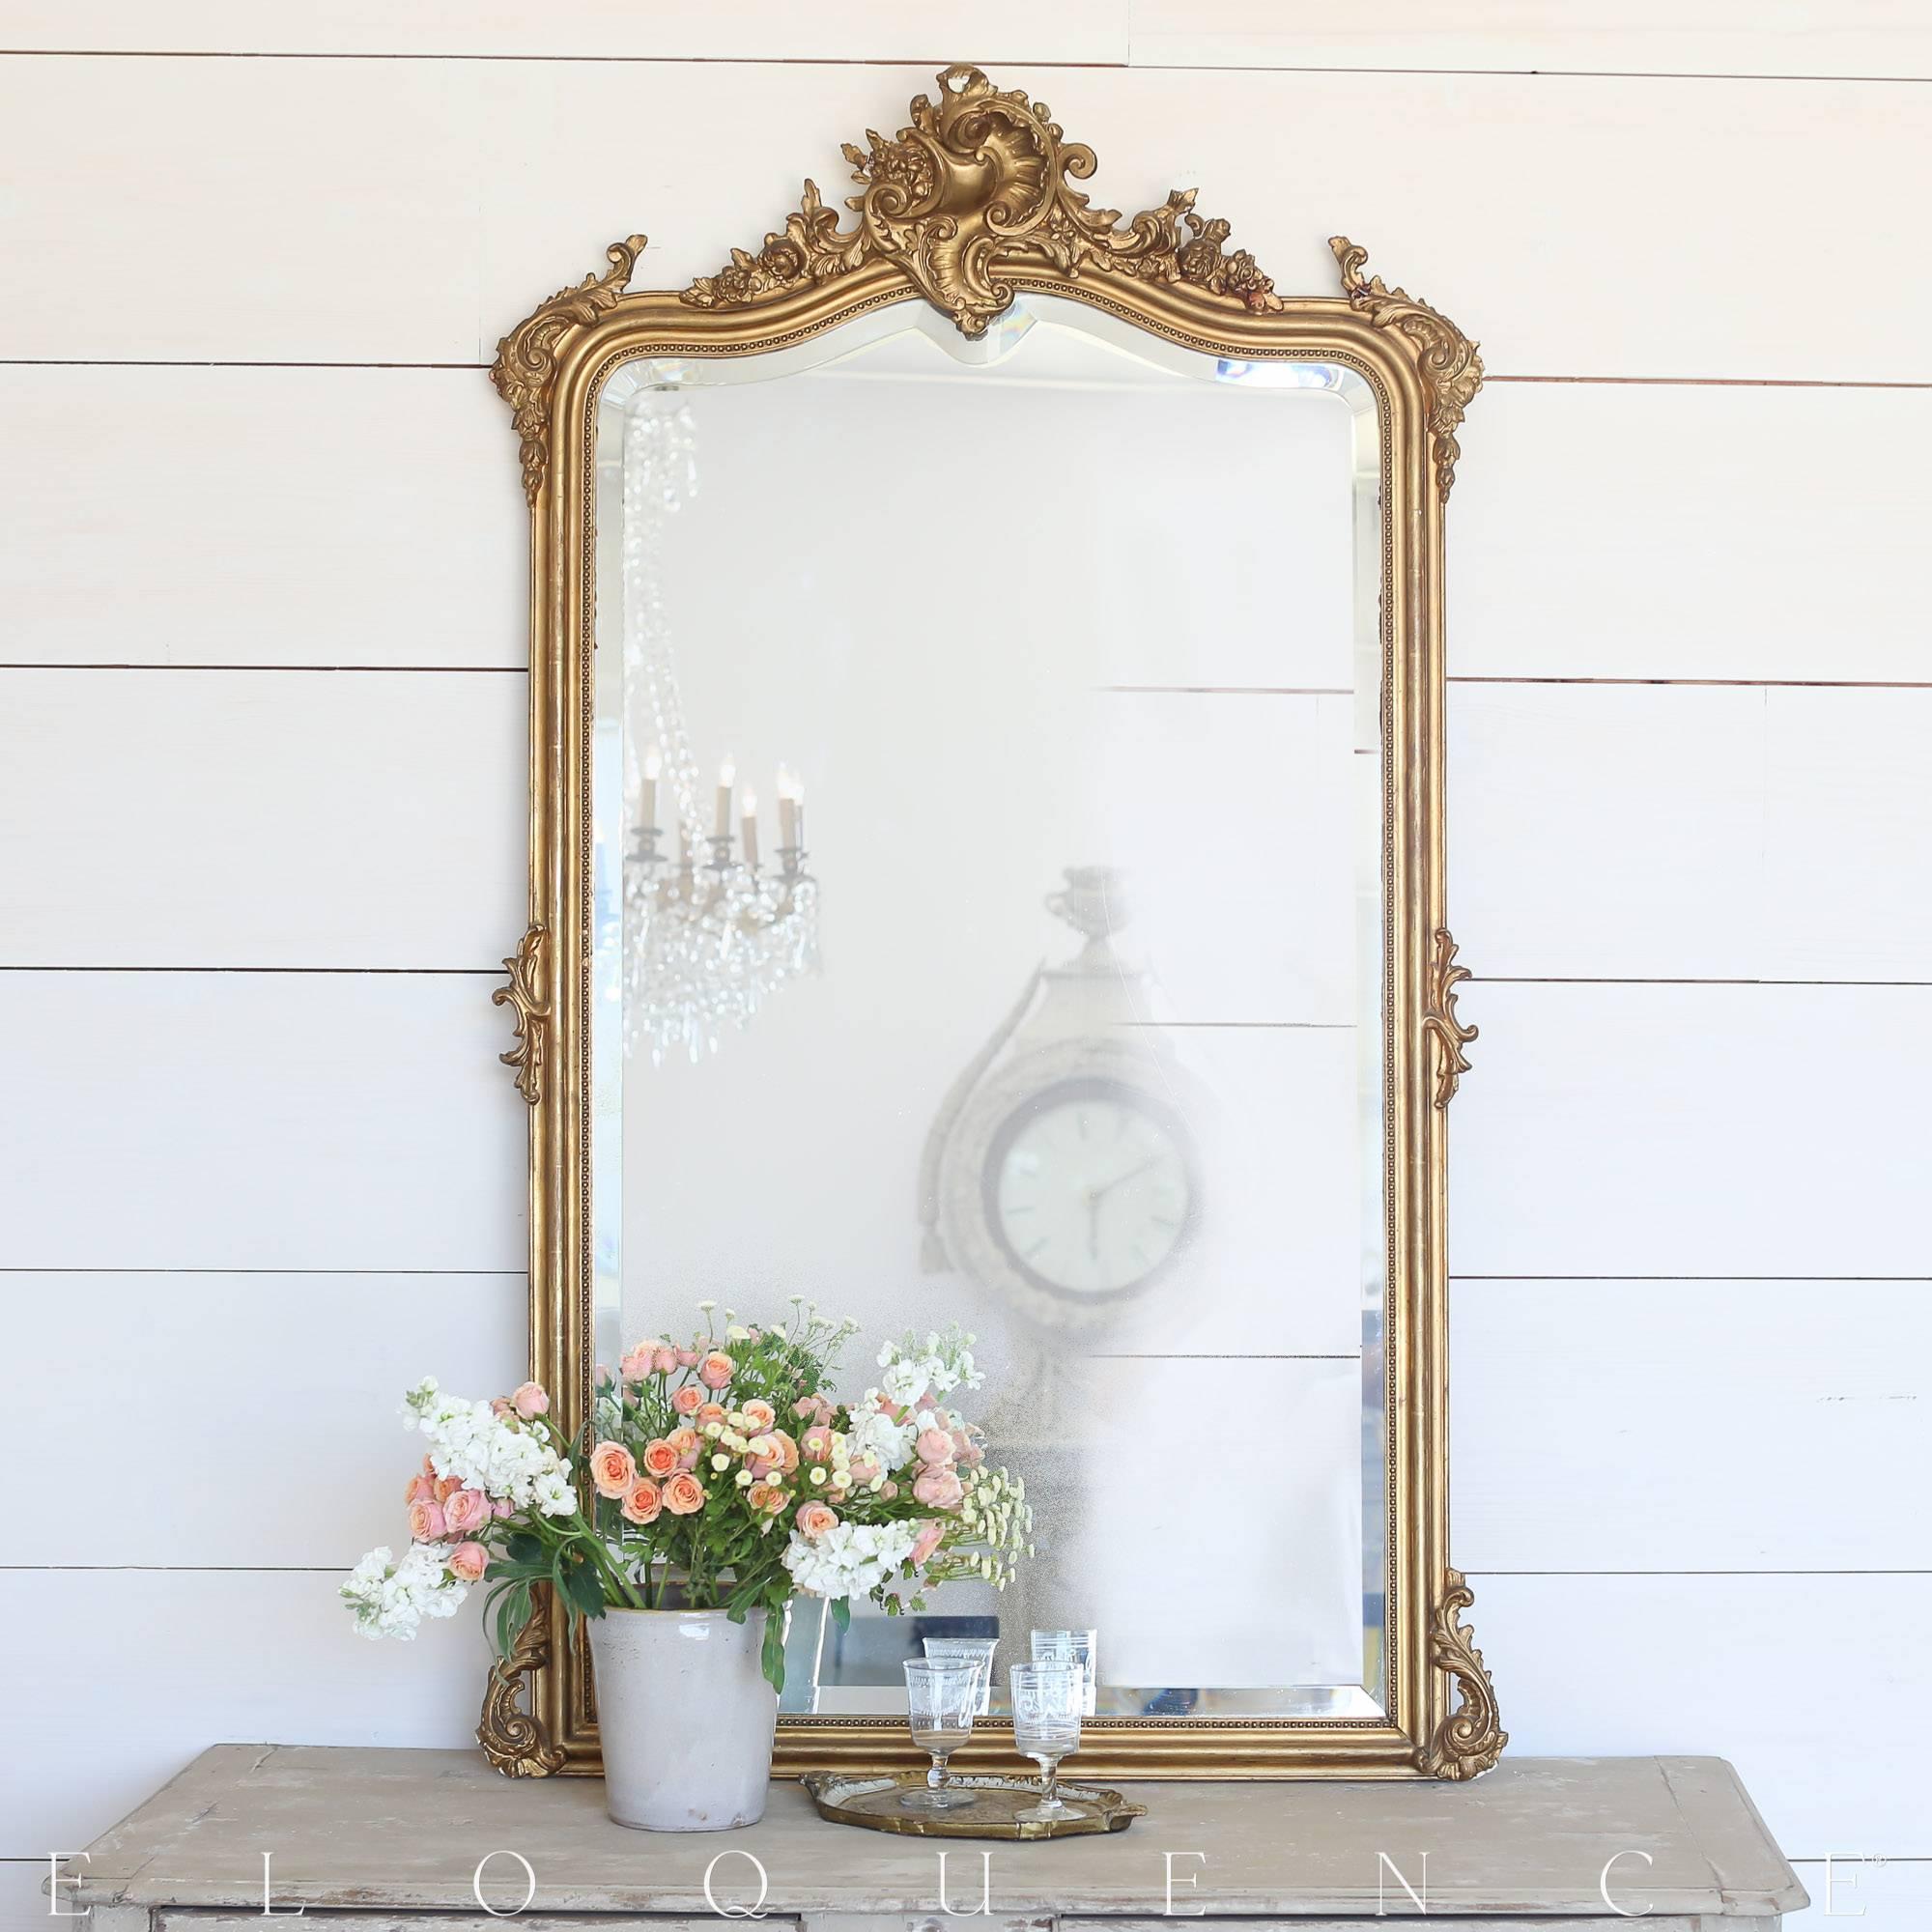 Stunning antique Louis Philippe floor mirror with ornate, floral carved crest, original beveled glass, and delicately roped border in a distressed gilt finish. Touches of umber reds whisper throughout the gilt and add old world charm to a bedroom,